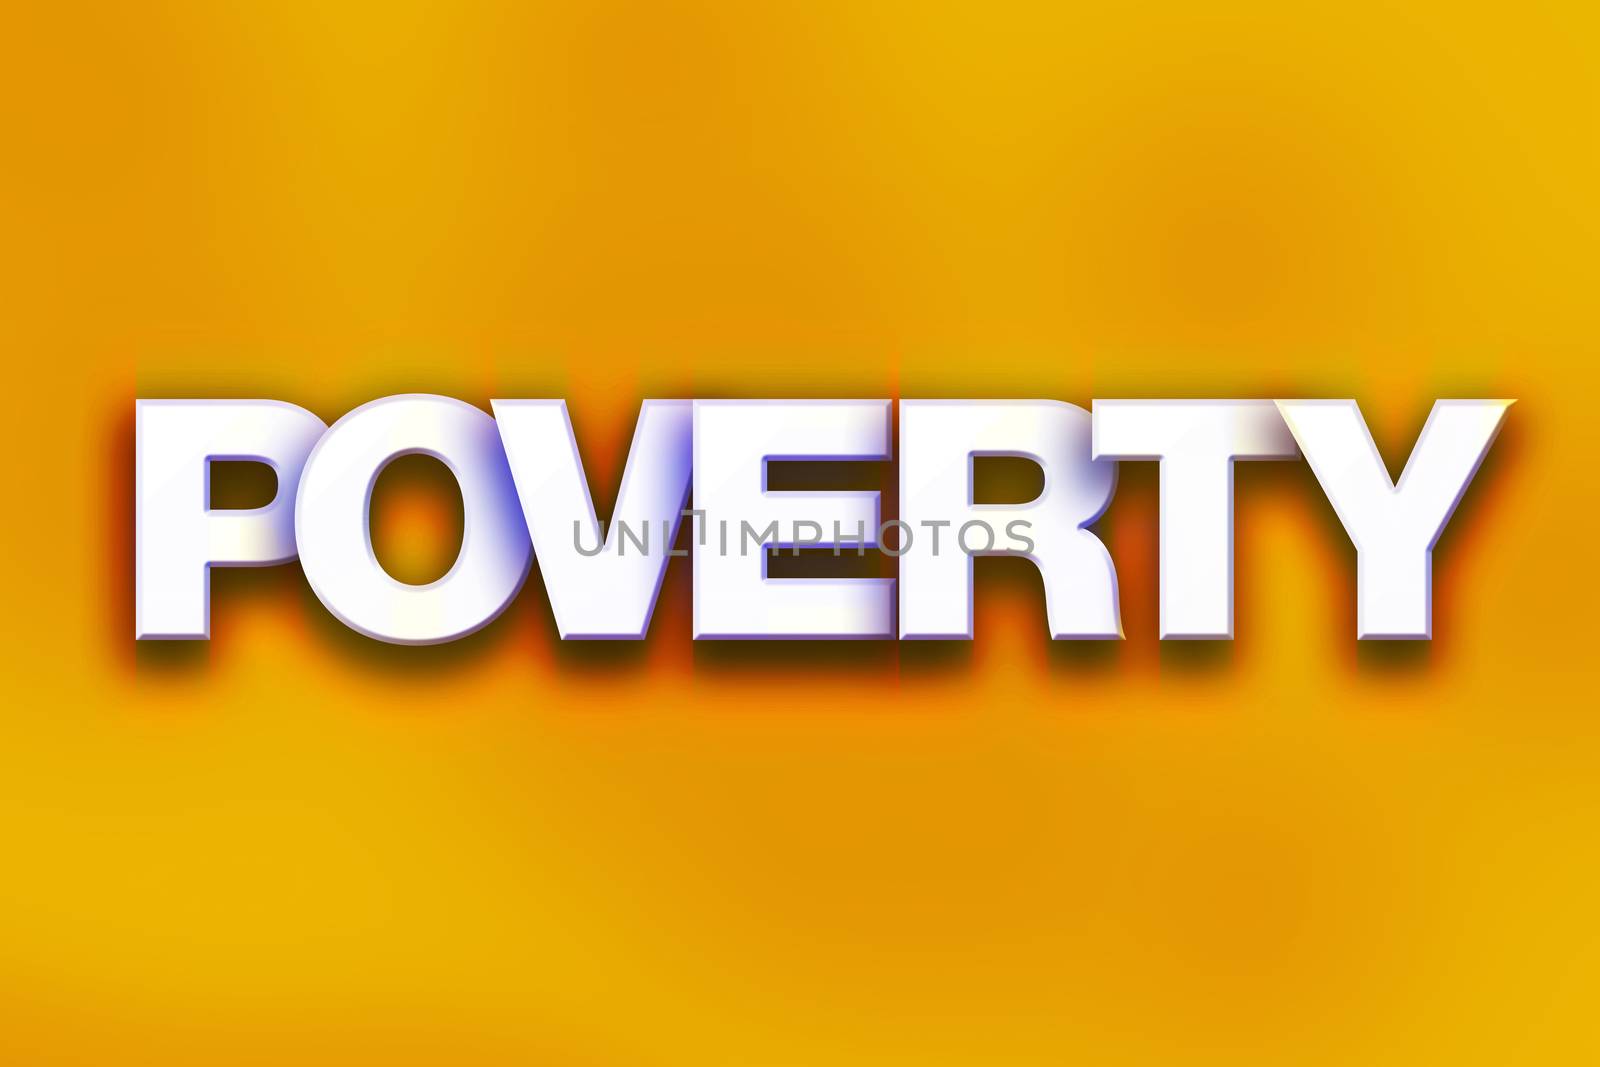 The word "Poverty" written in white 3D letters on a colorful background concept and theme.